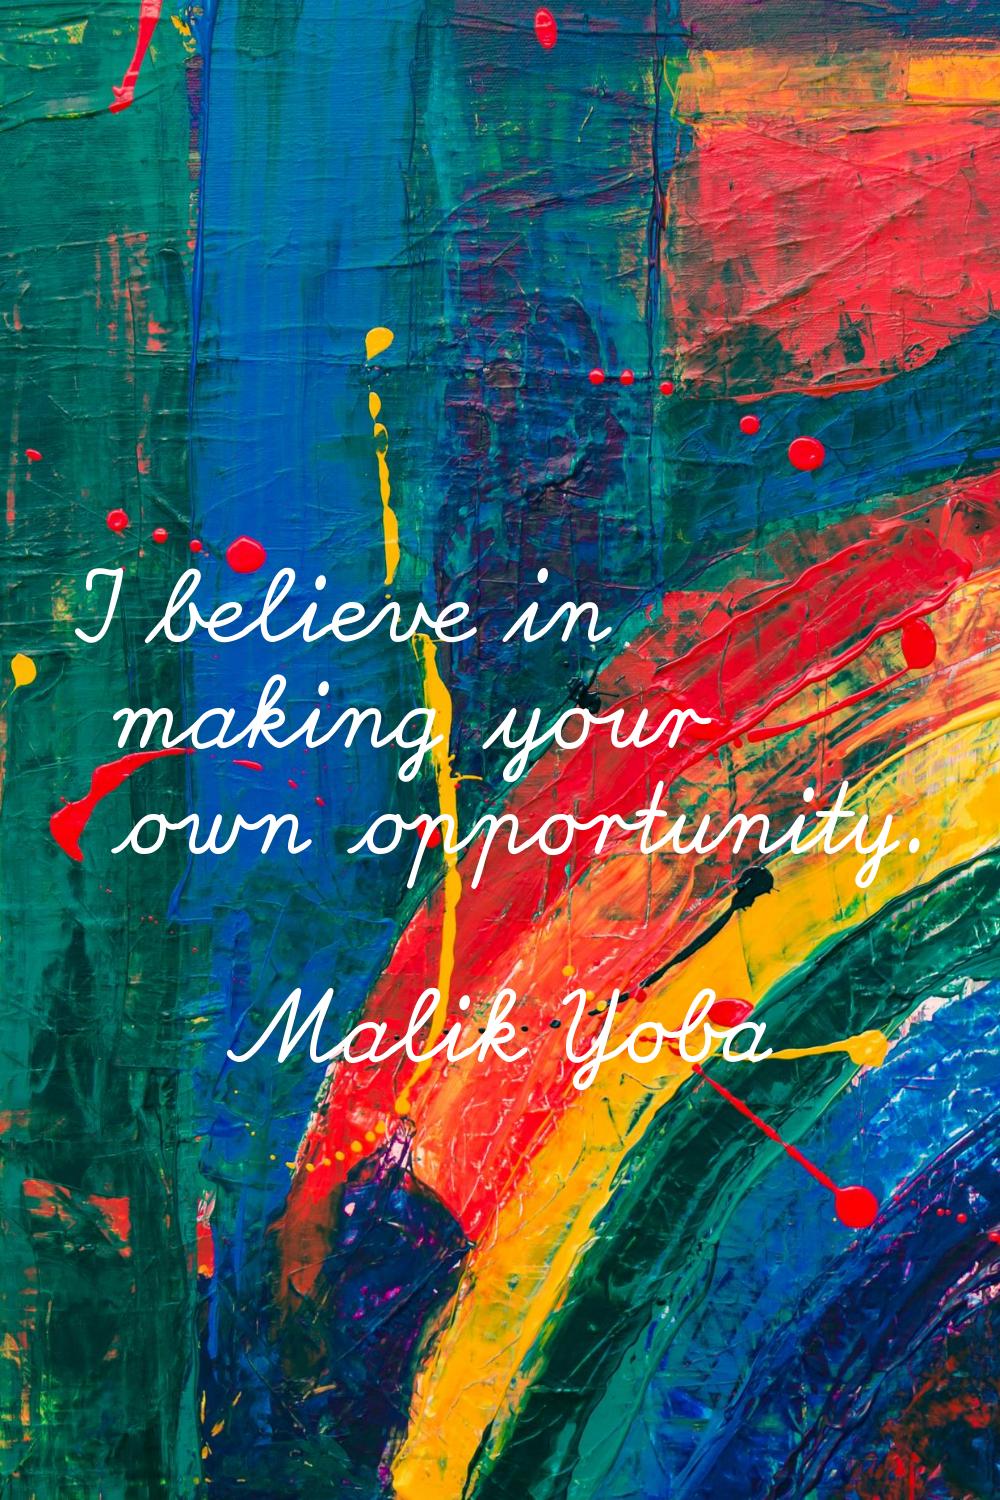 I believe in making your own opportunity.